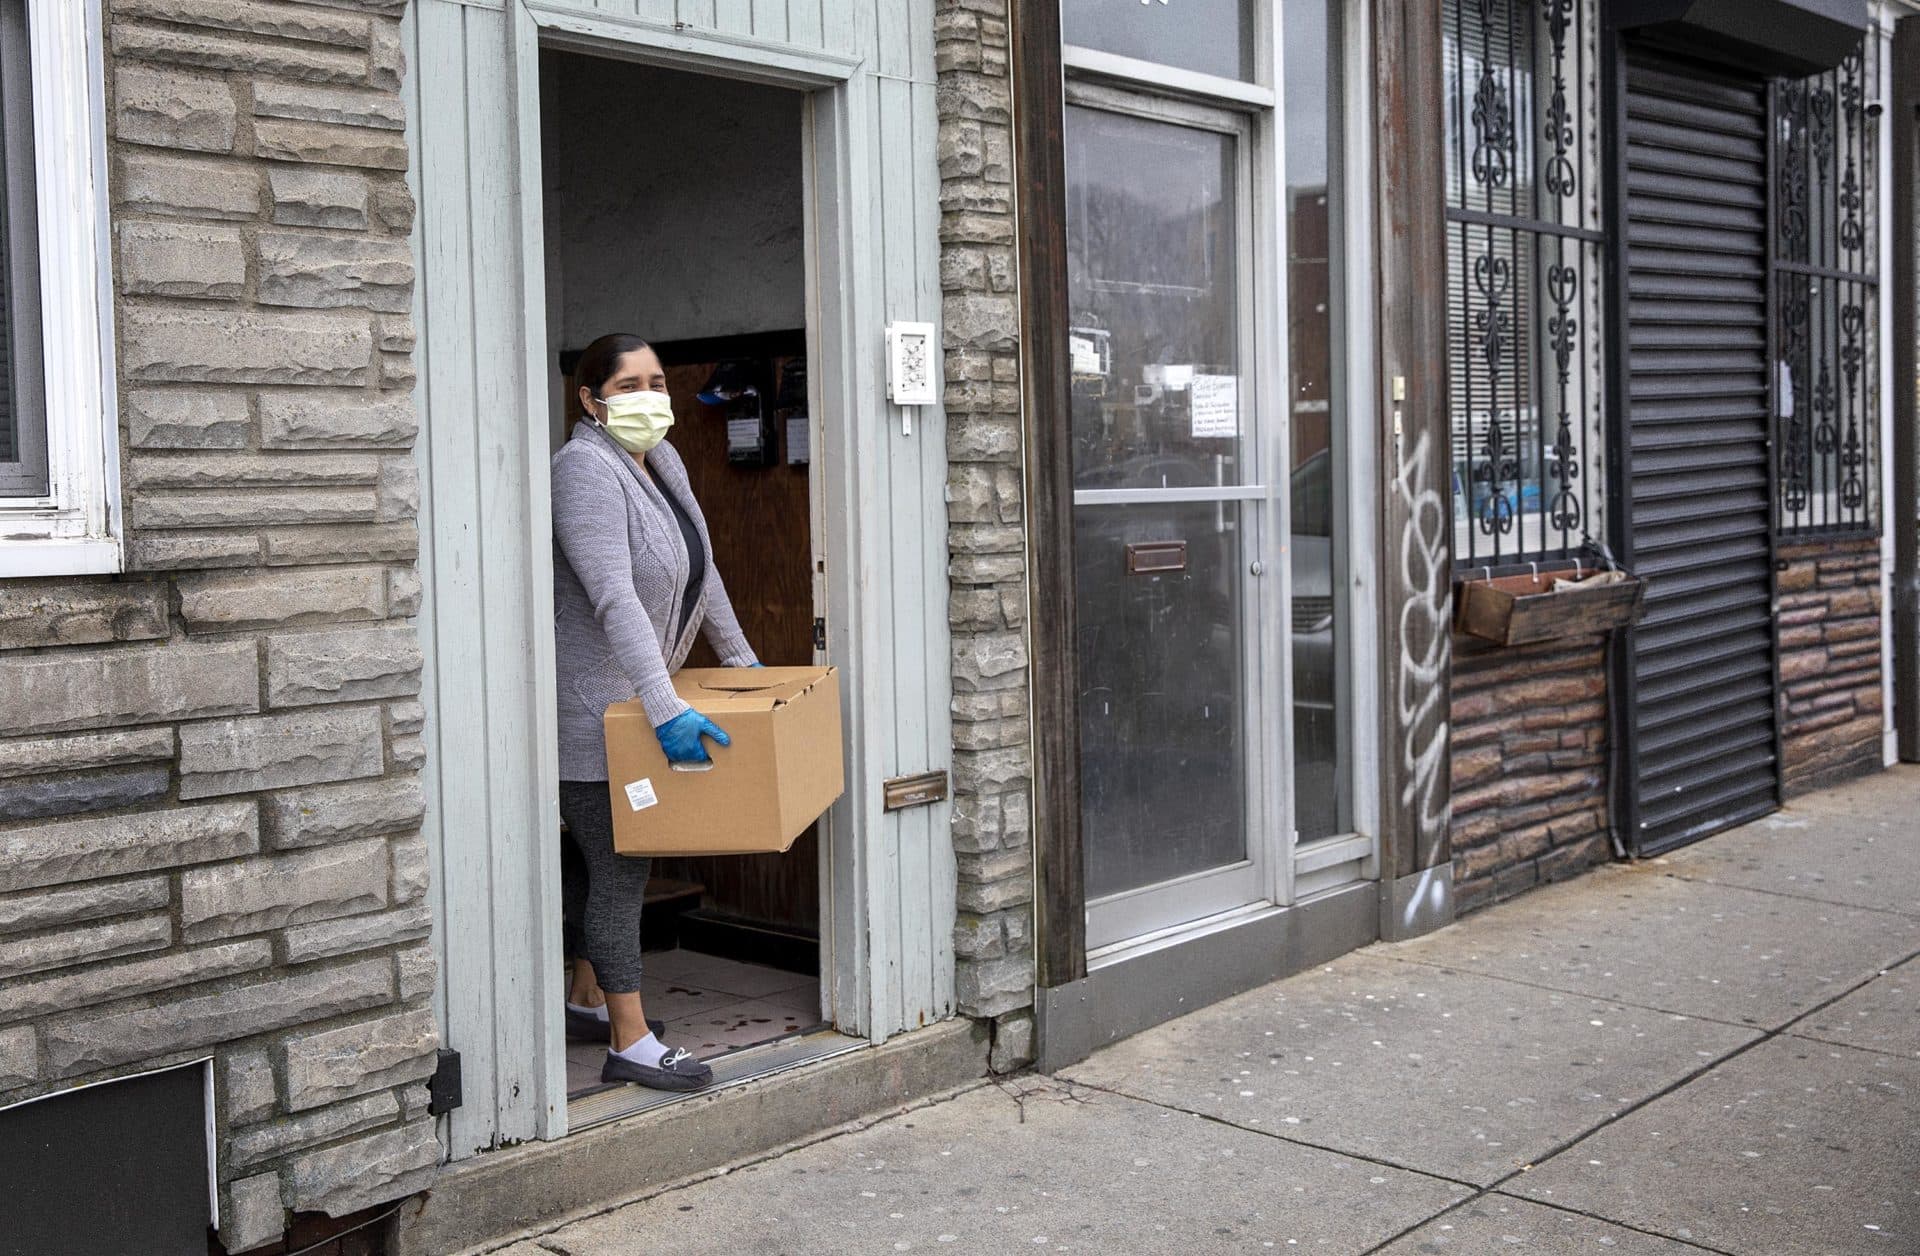 Angelica, who is isolating herself after testing positive for COVID-19, collects the Centro Presente food delivery from her doorstep. (Robin Lubbock/WBUR)